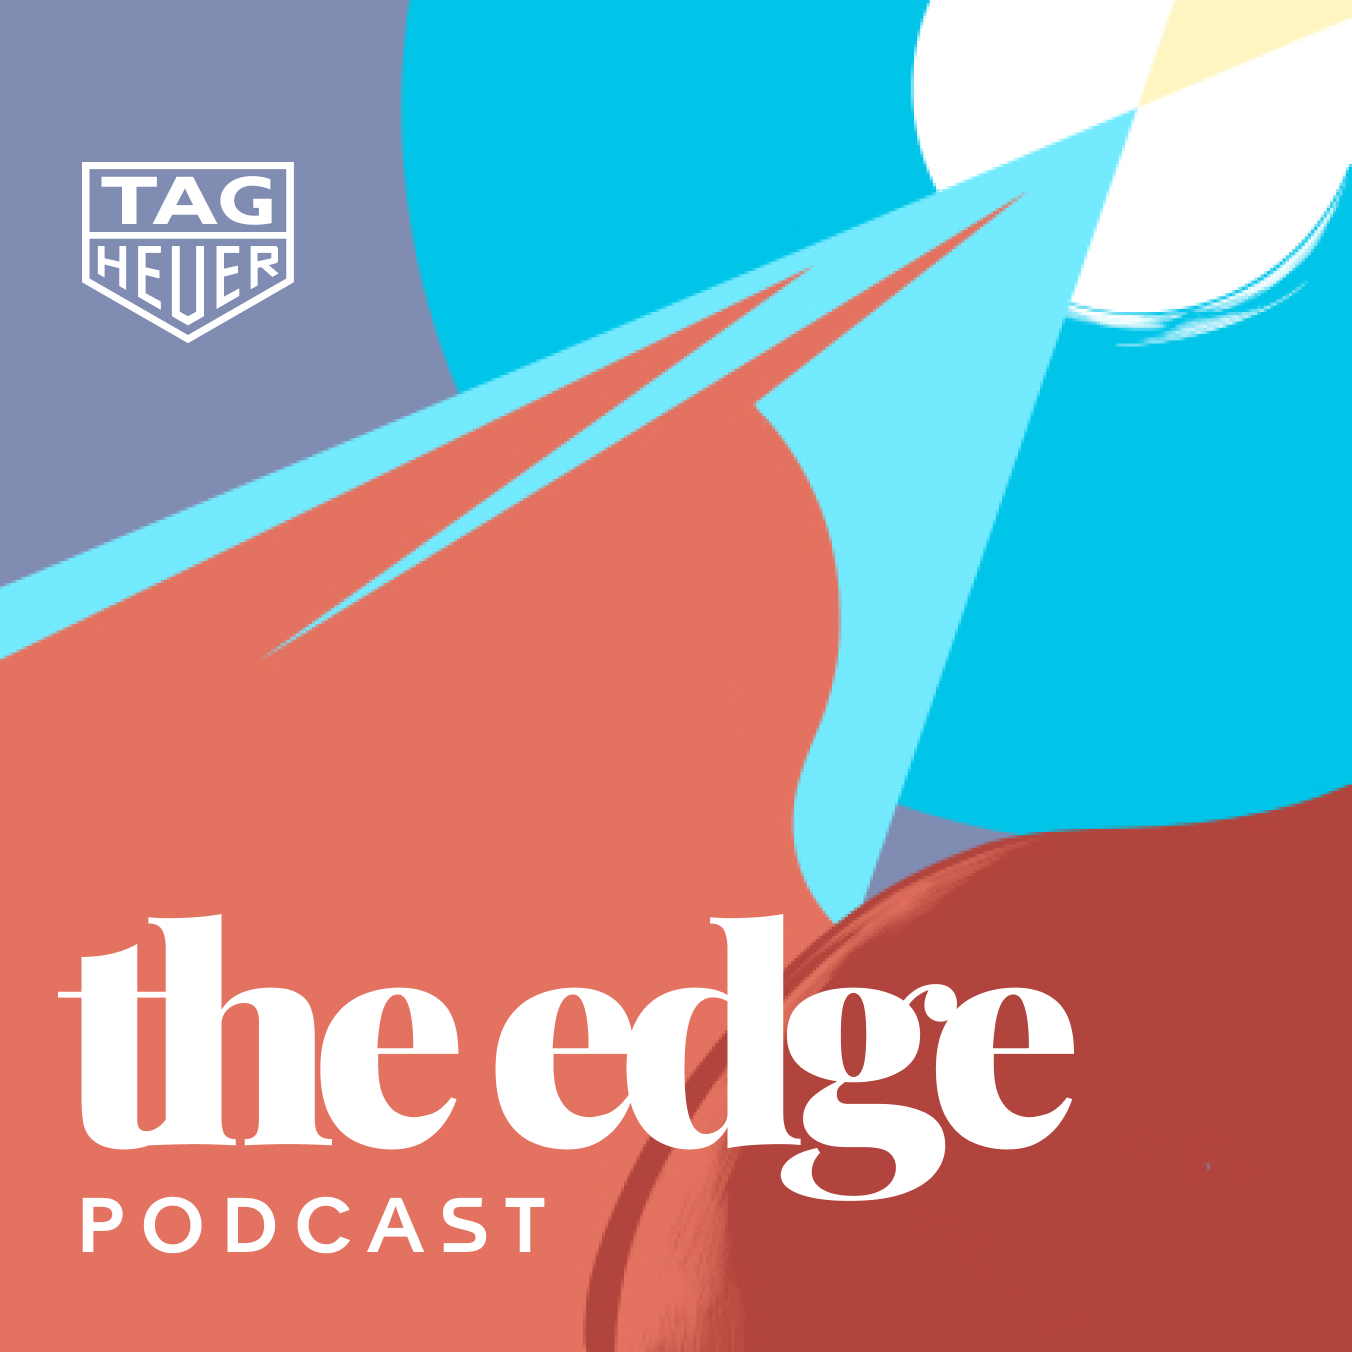 Coming soon: Season 2 of The Edge, a podcast by TAG Heuer